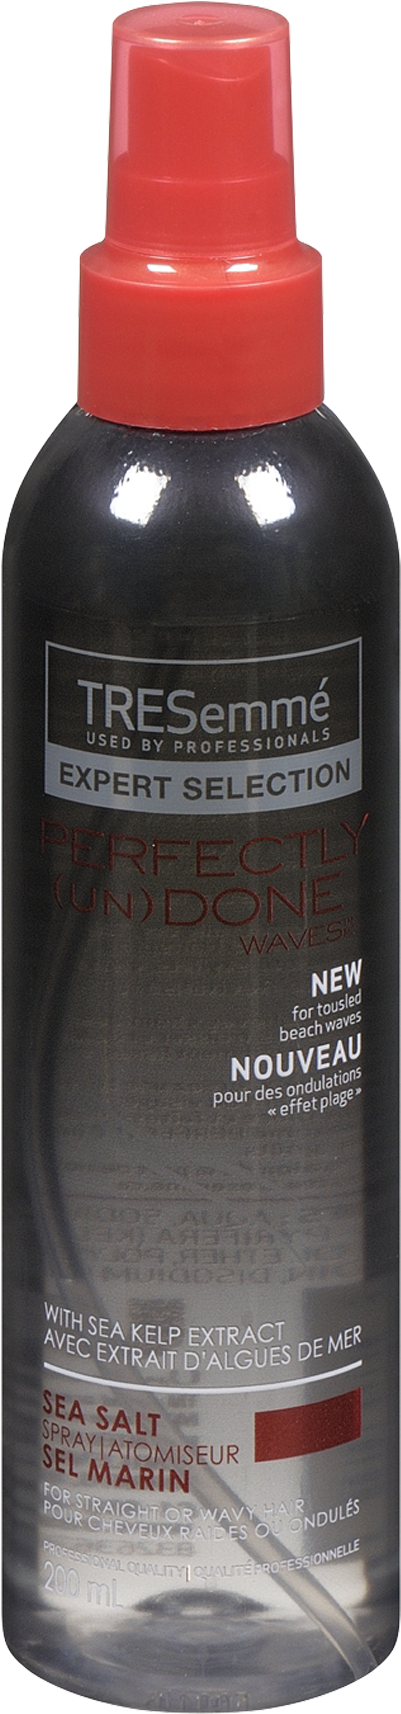 Tresemme Perfectly (un)done Sea Salt Spray (2048x2048), Png Download